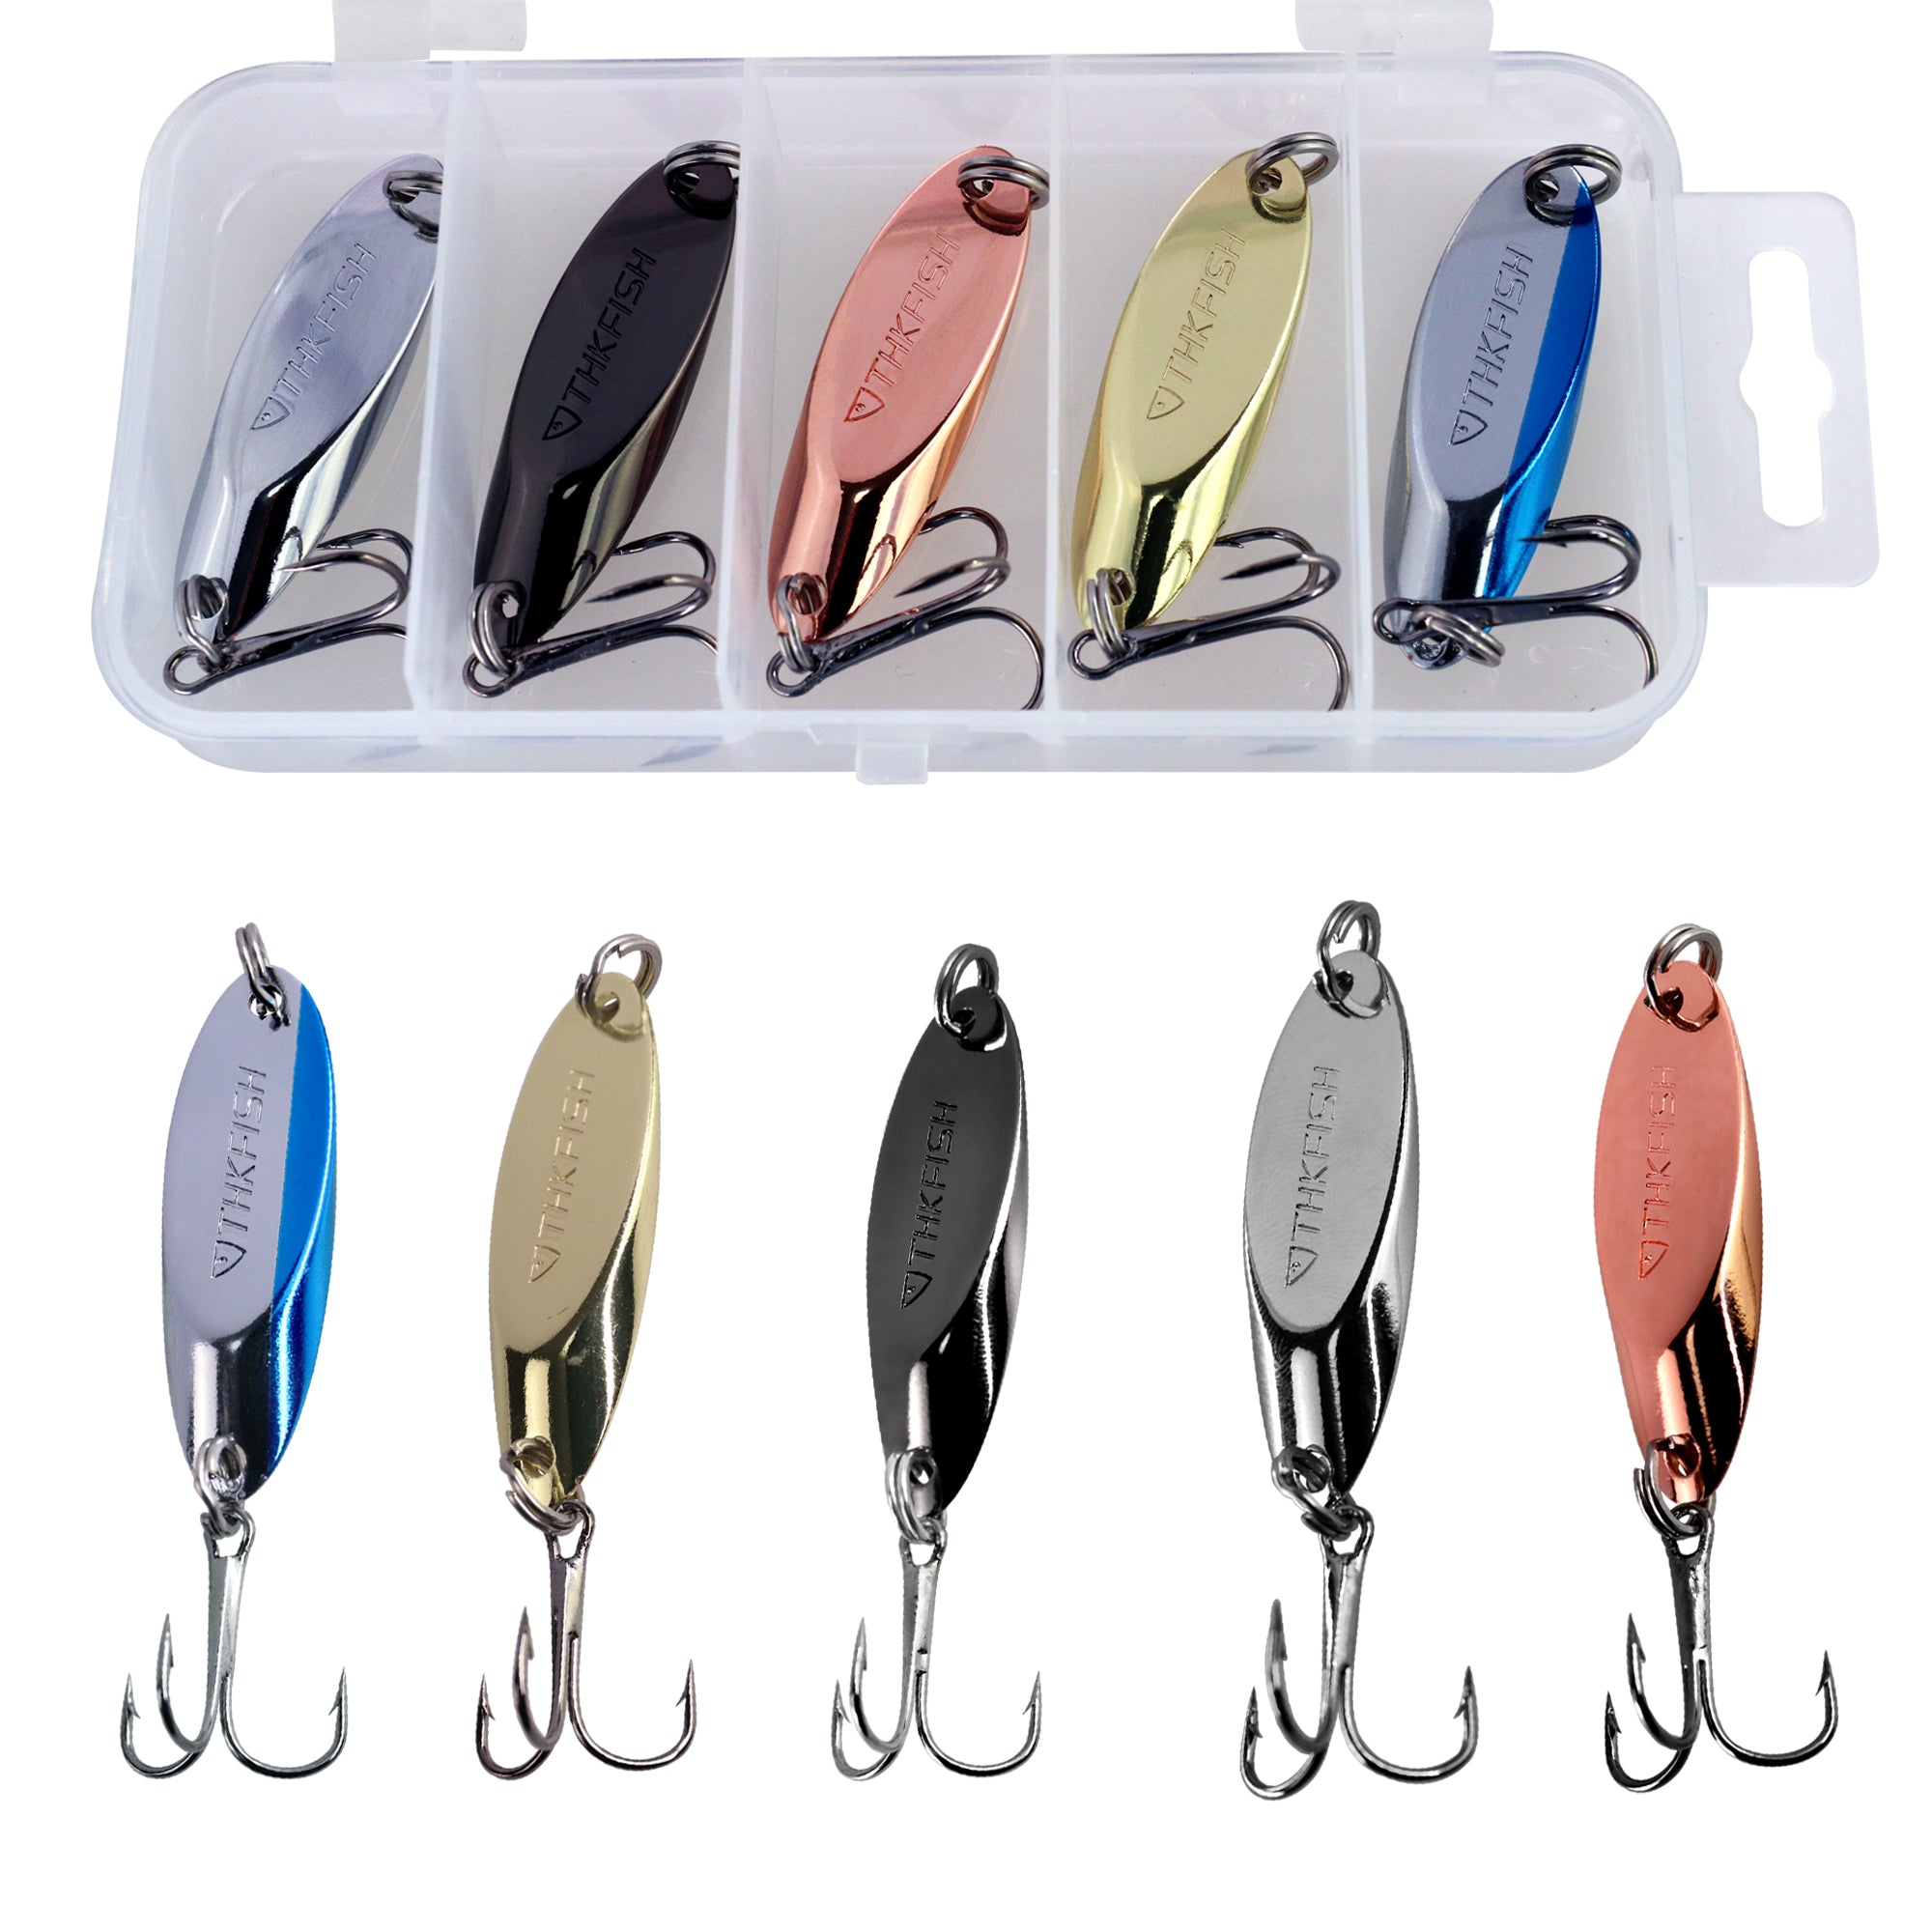 THKFISH 5pcs Fishing Spoons Lures for Trout Pike Bass Crappie Walleye